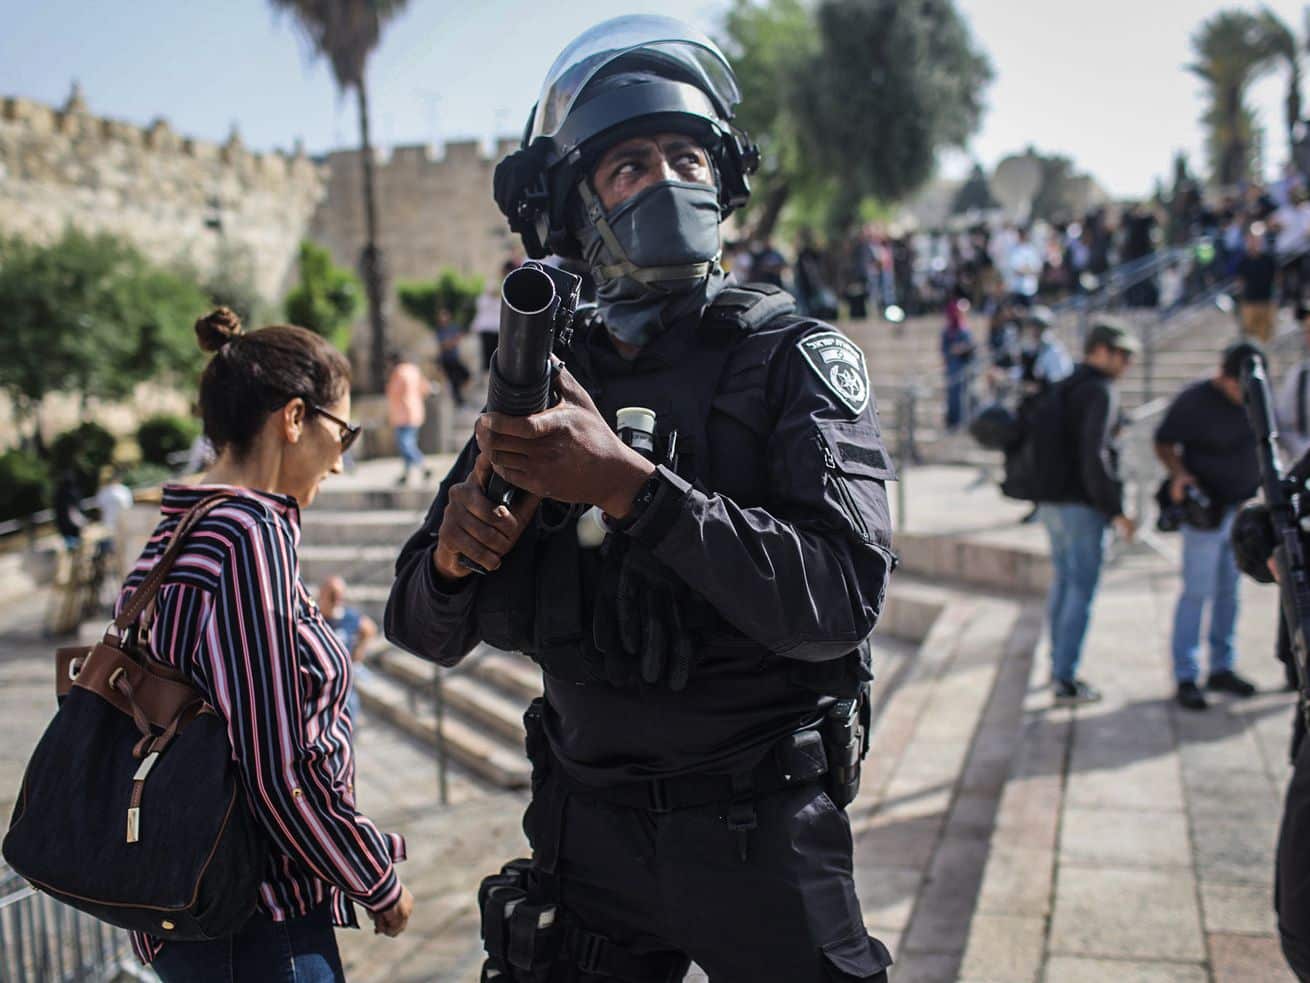 Israel’s actions in East Jerusalem are a human rights test for Biden